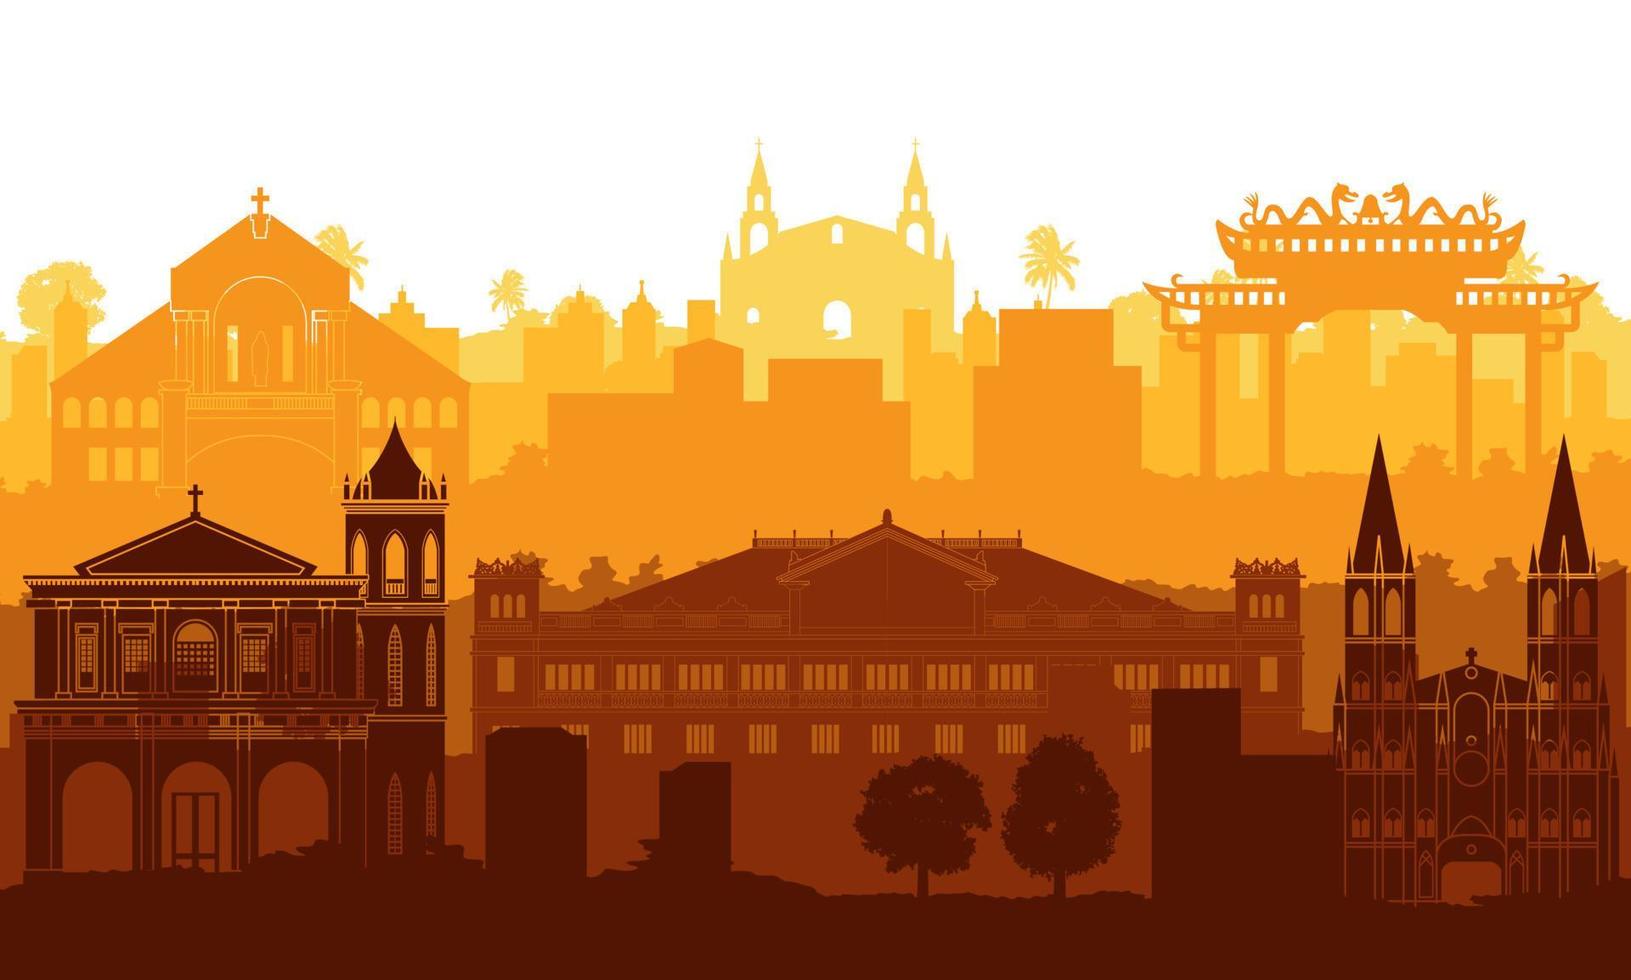 Philippines famous landmarks by silhouette style vector